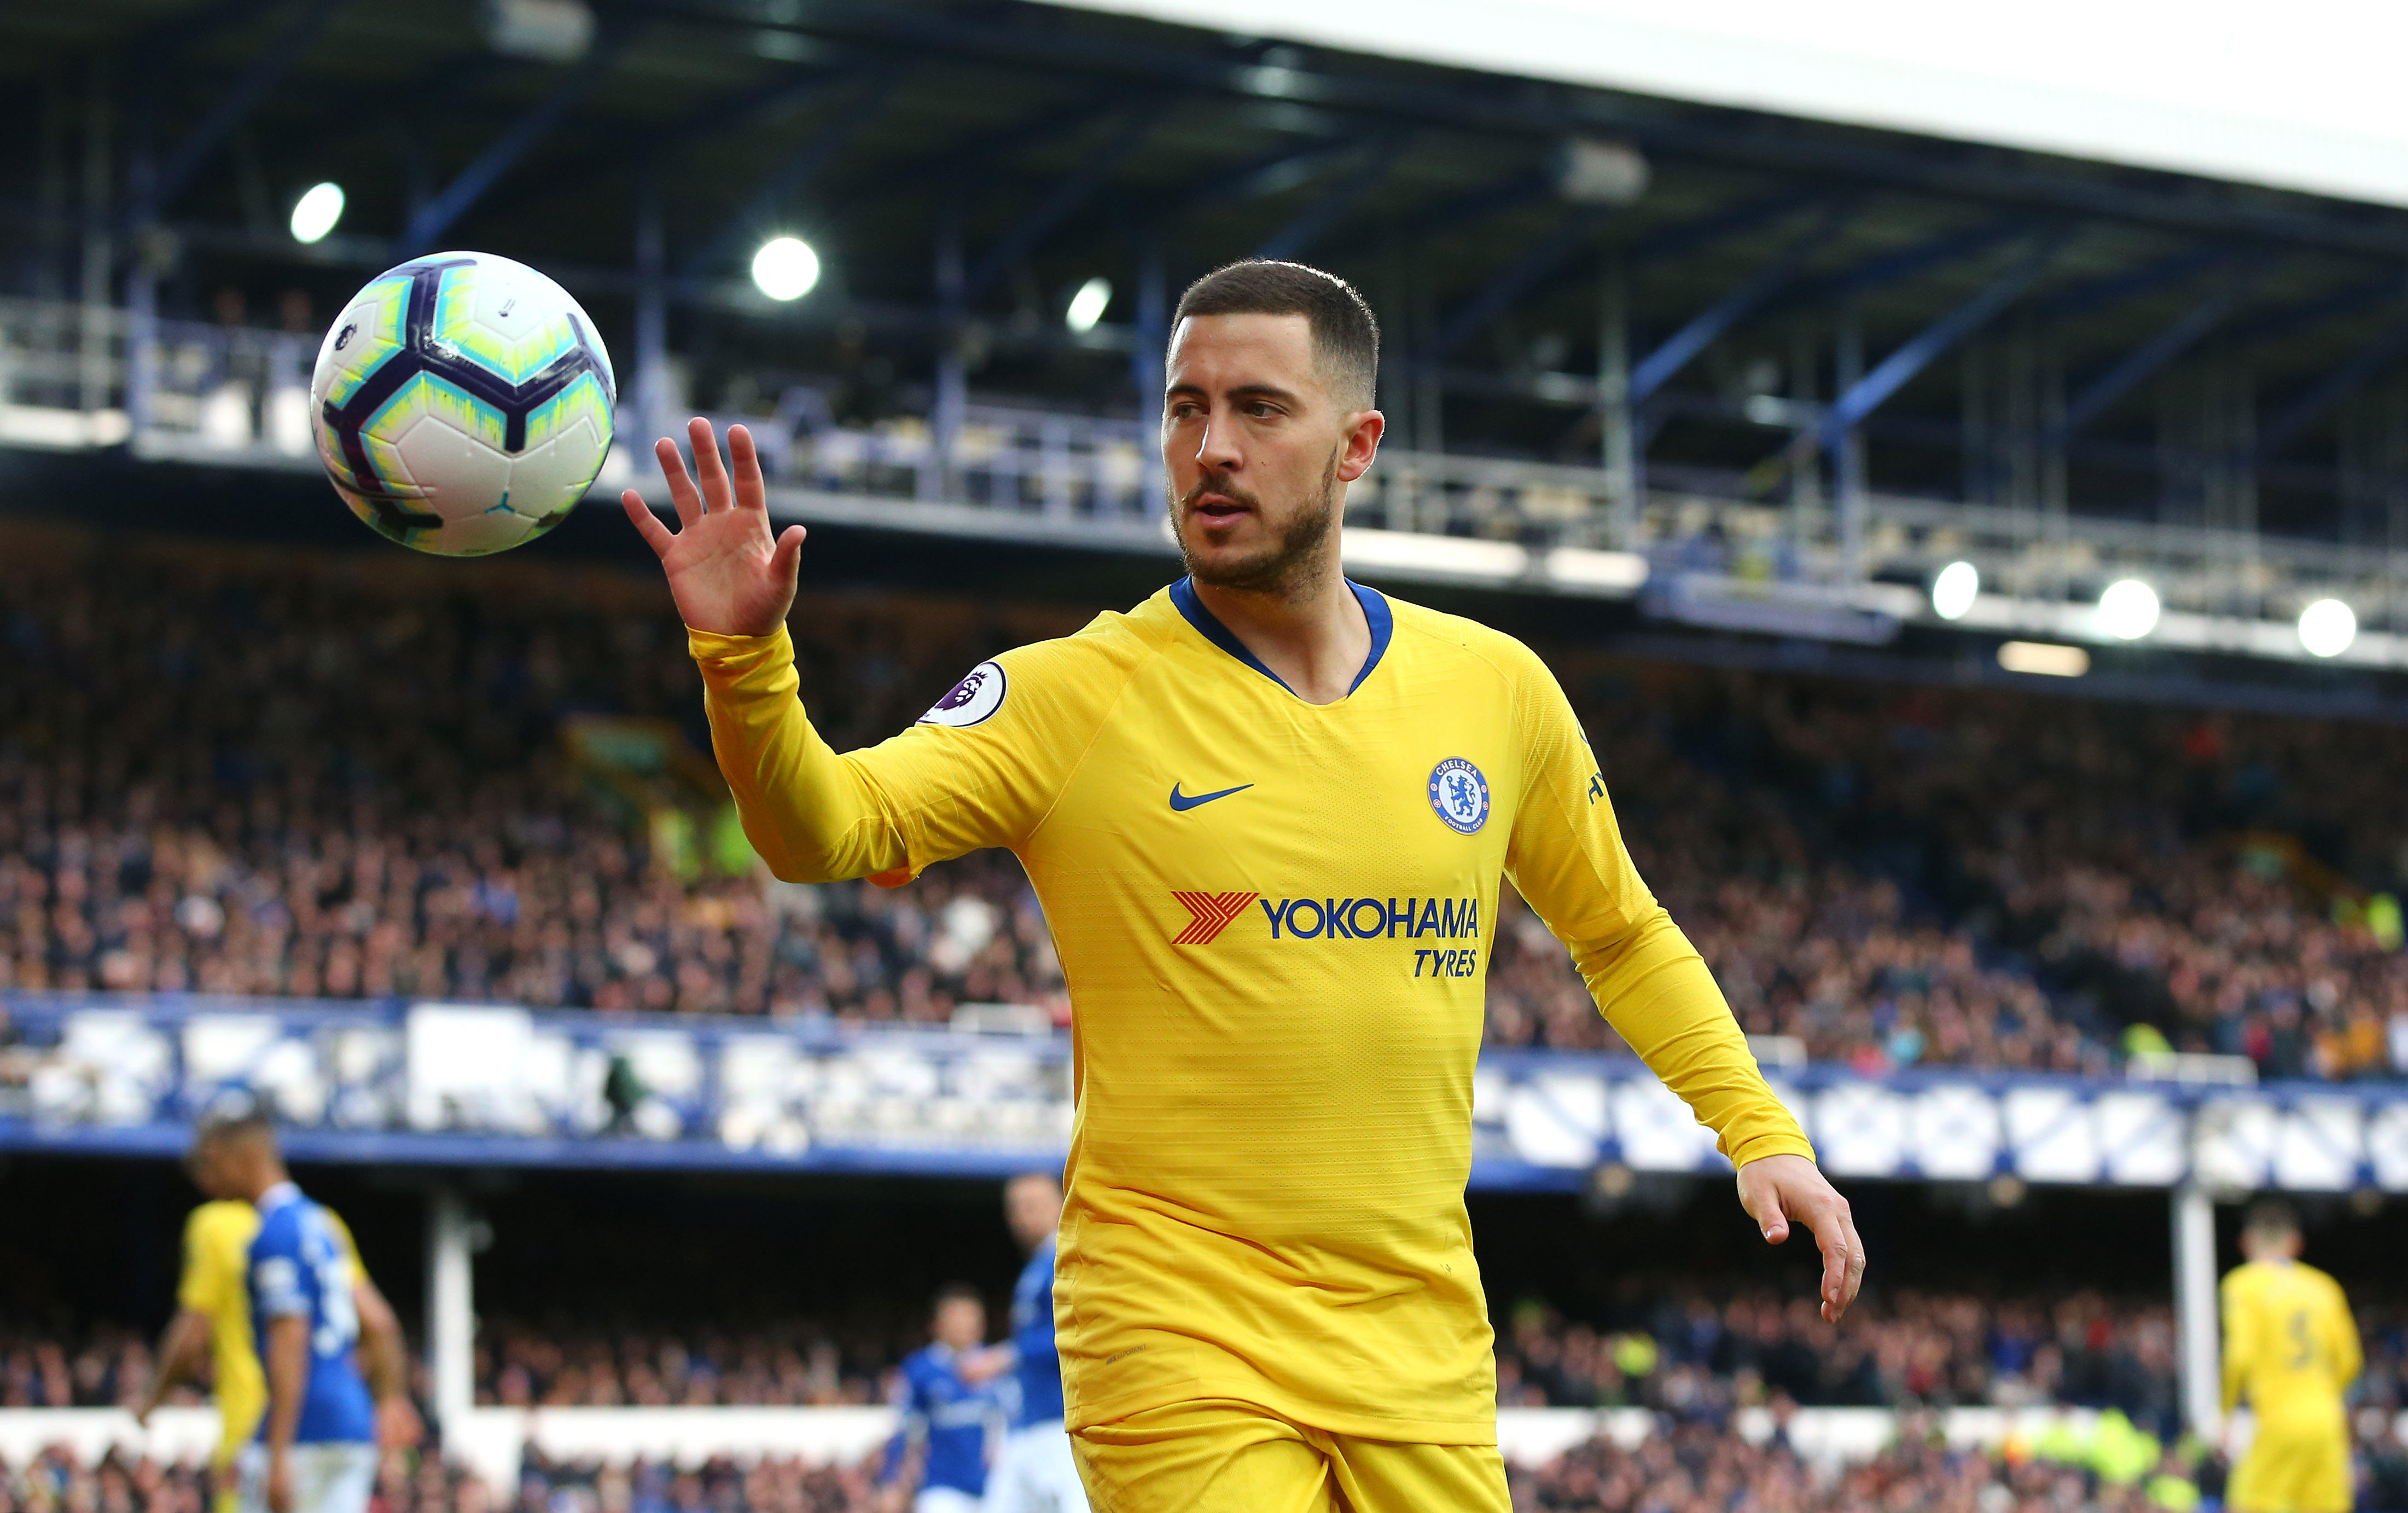 LIVERPOOL, ENGLAND - MARCH 17: Eden Hazard of Chelsea FC collects the ball during the Premier League match between Everton FC and Chelsea FC at Goodison Park on March 17, 2019 in Liverpool, United Kingdom. (Photo by Alex Livesey/Getty Images)